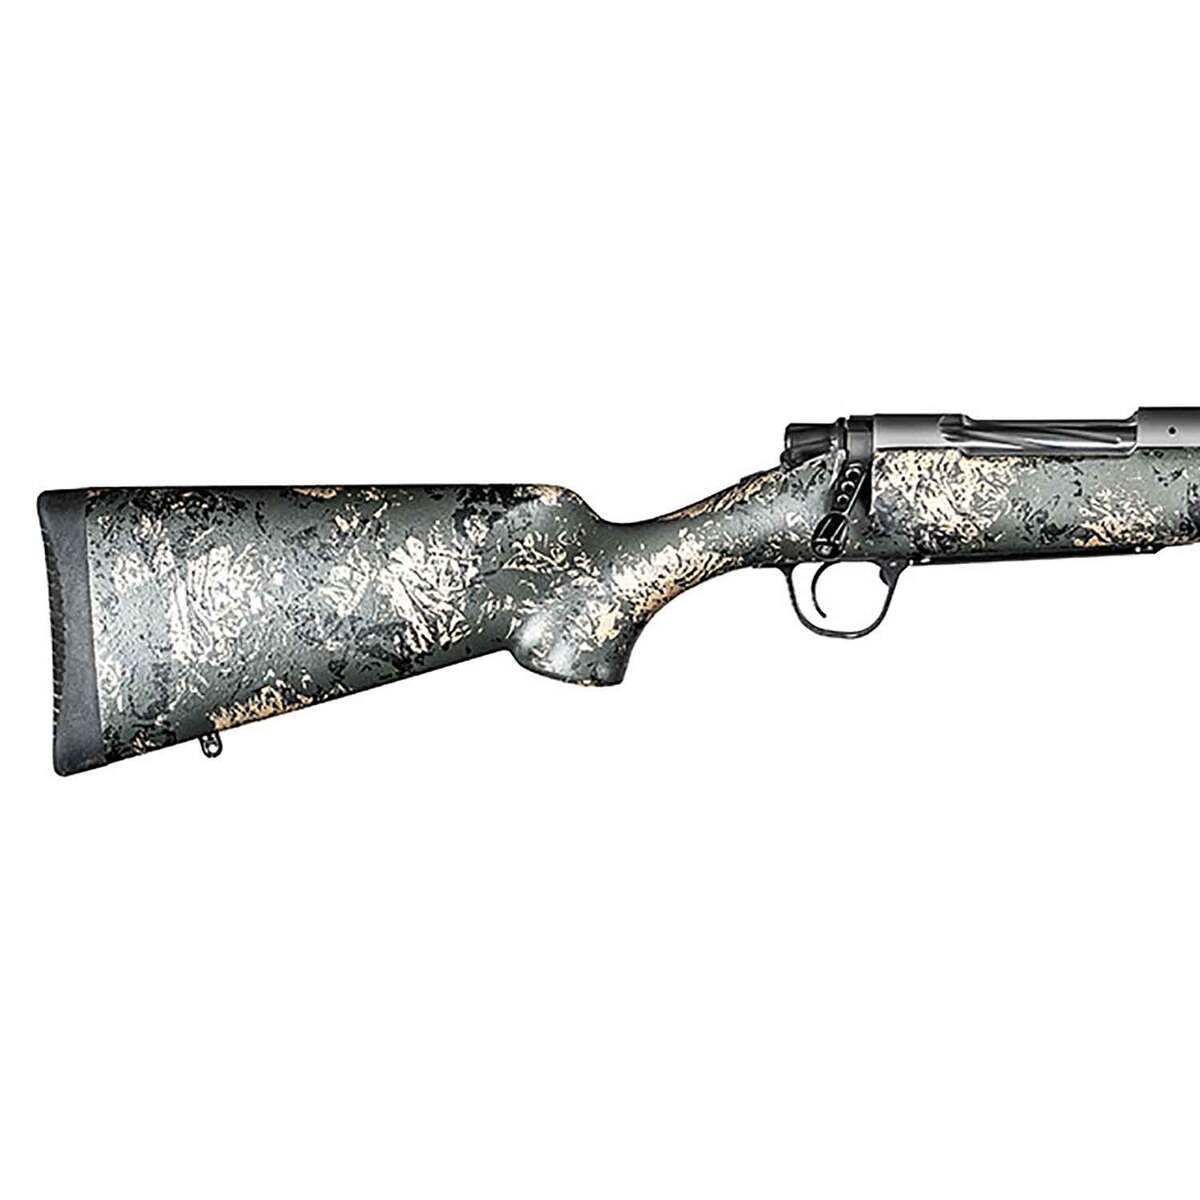 christensen arms ridgeline fft natural stainless green bolt action rifle 7mm 08 remington 20in 1739589 2